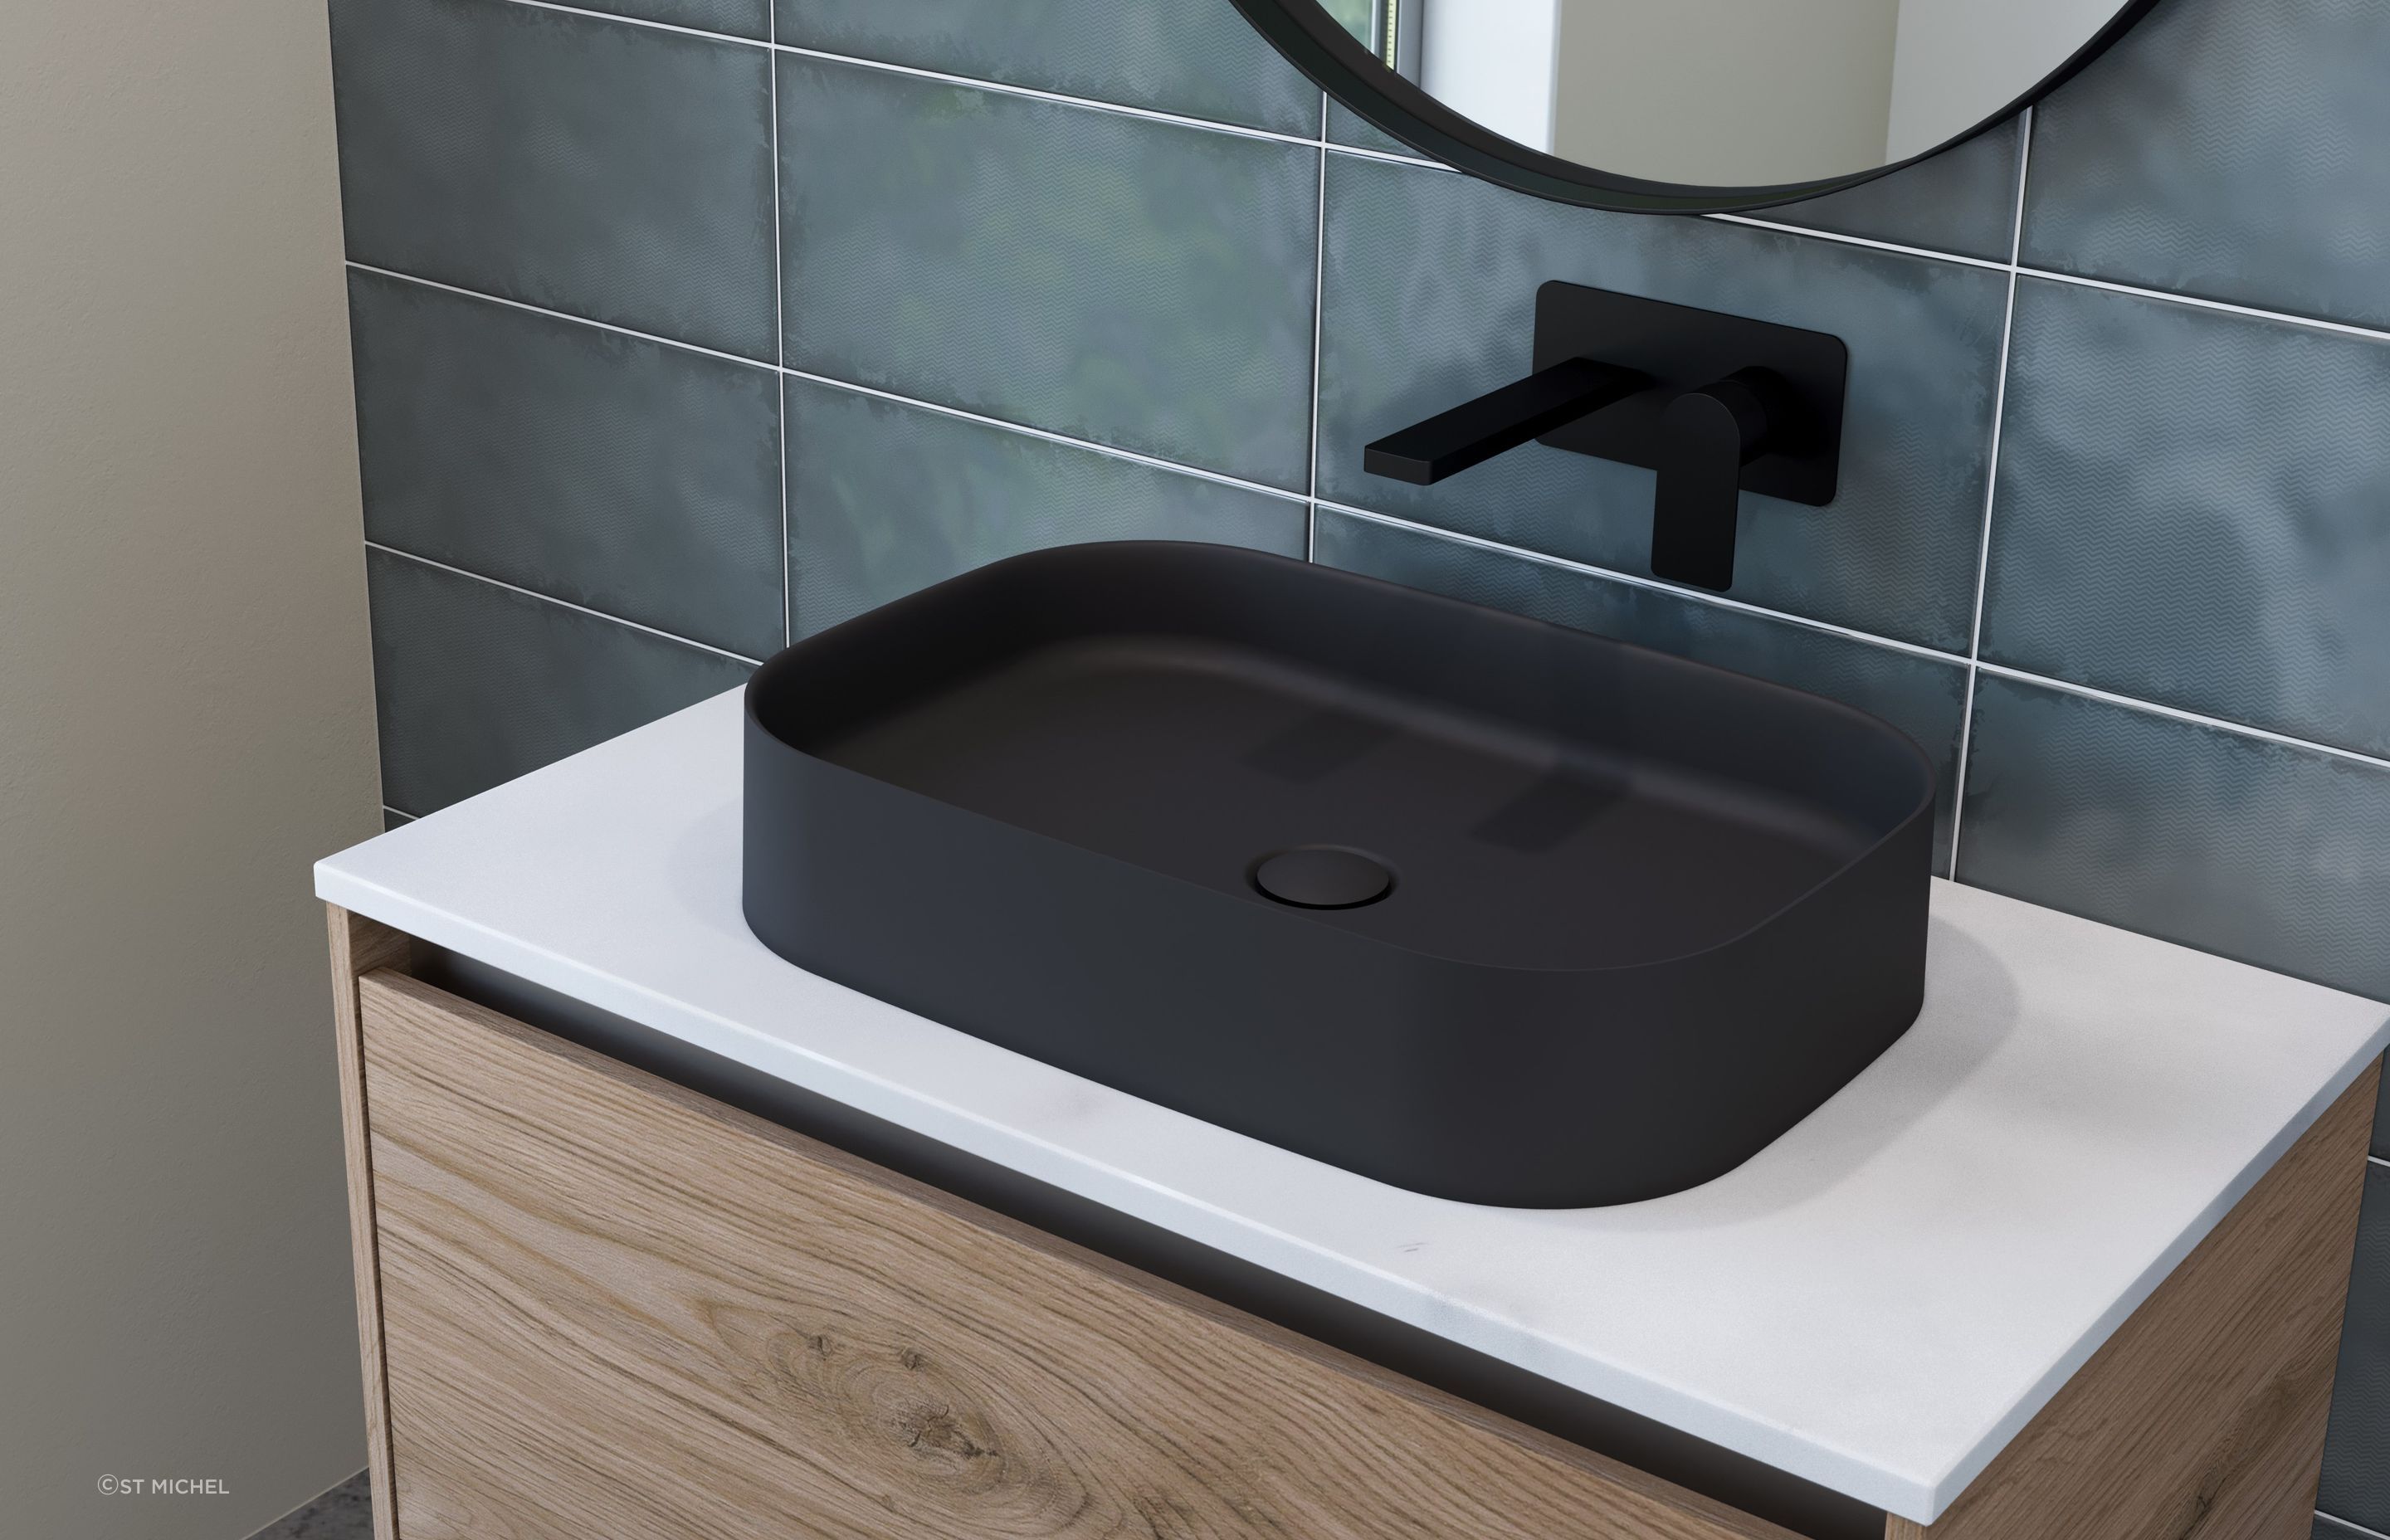 The Smart B Basin represents the very best in Italian creativity and precision.